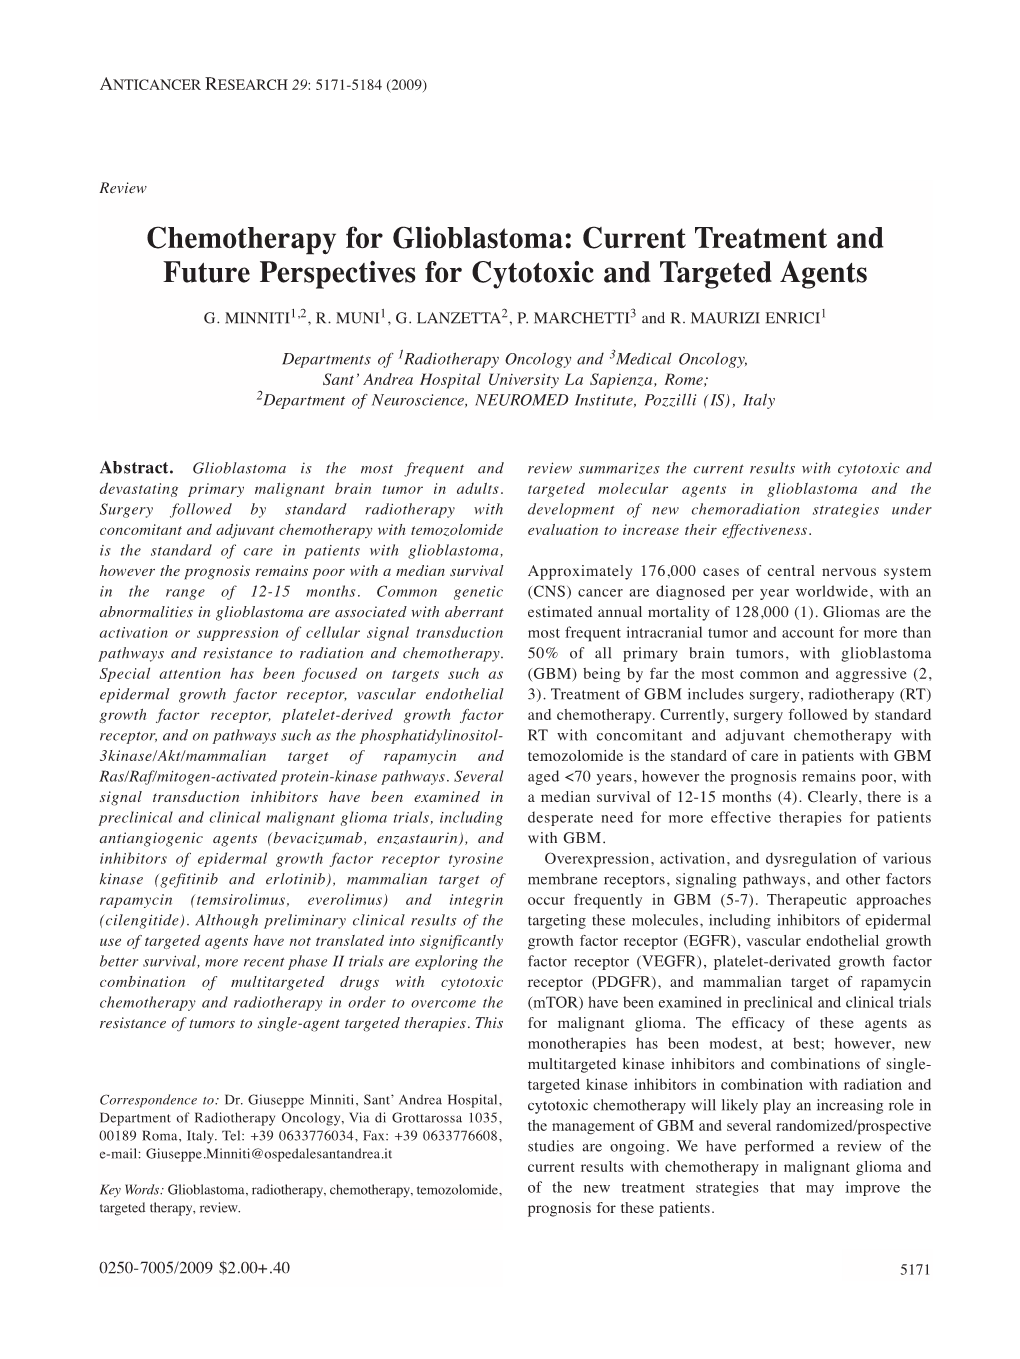 Chemotherapy for Glioblastoma: Current Treatment and Future Perspectives for Cytotoxic and Targeted Agents